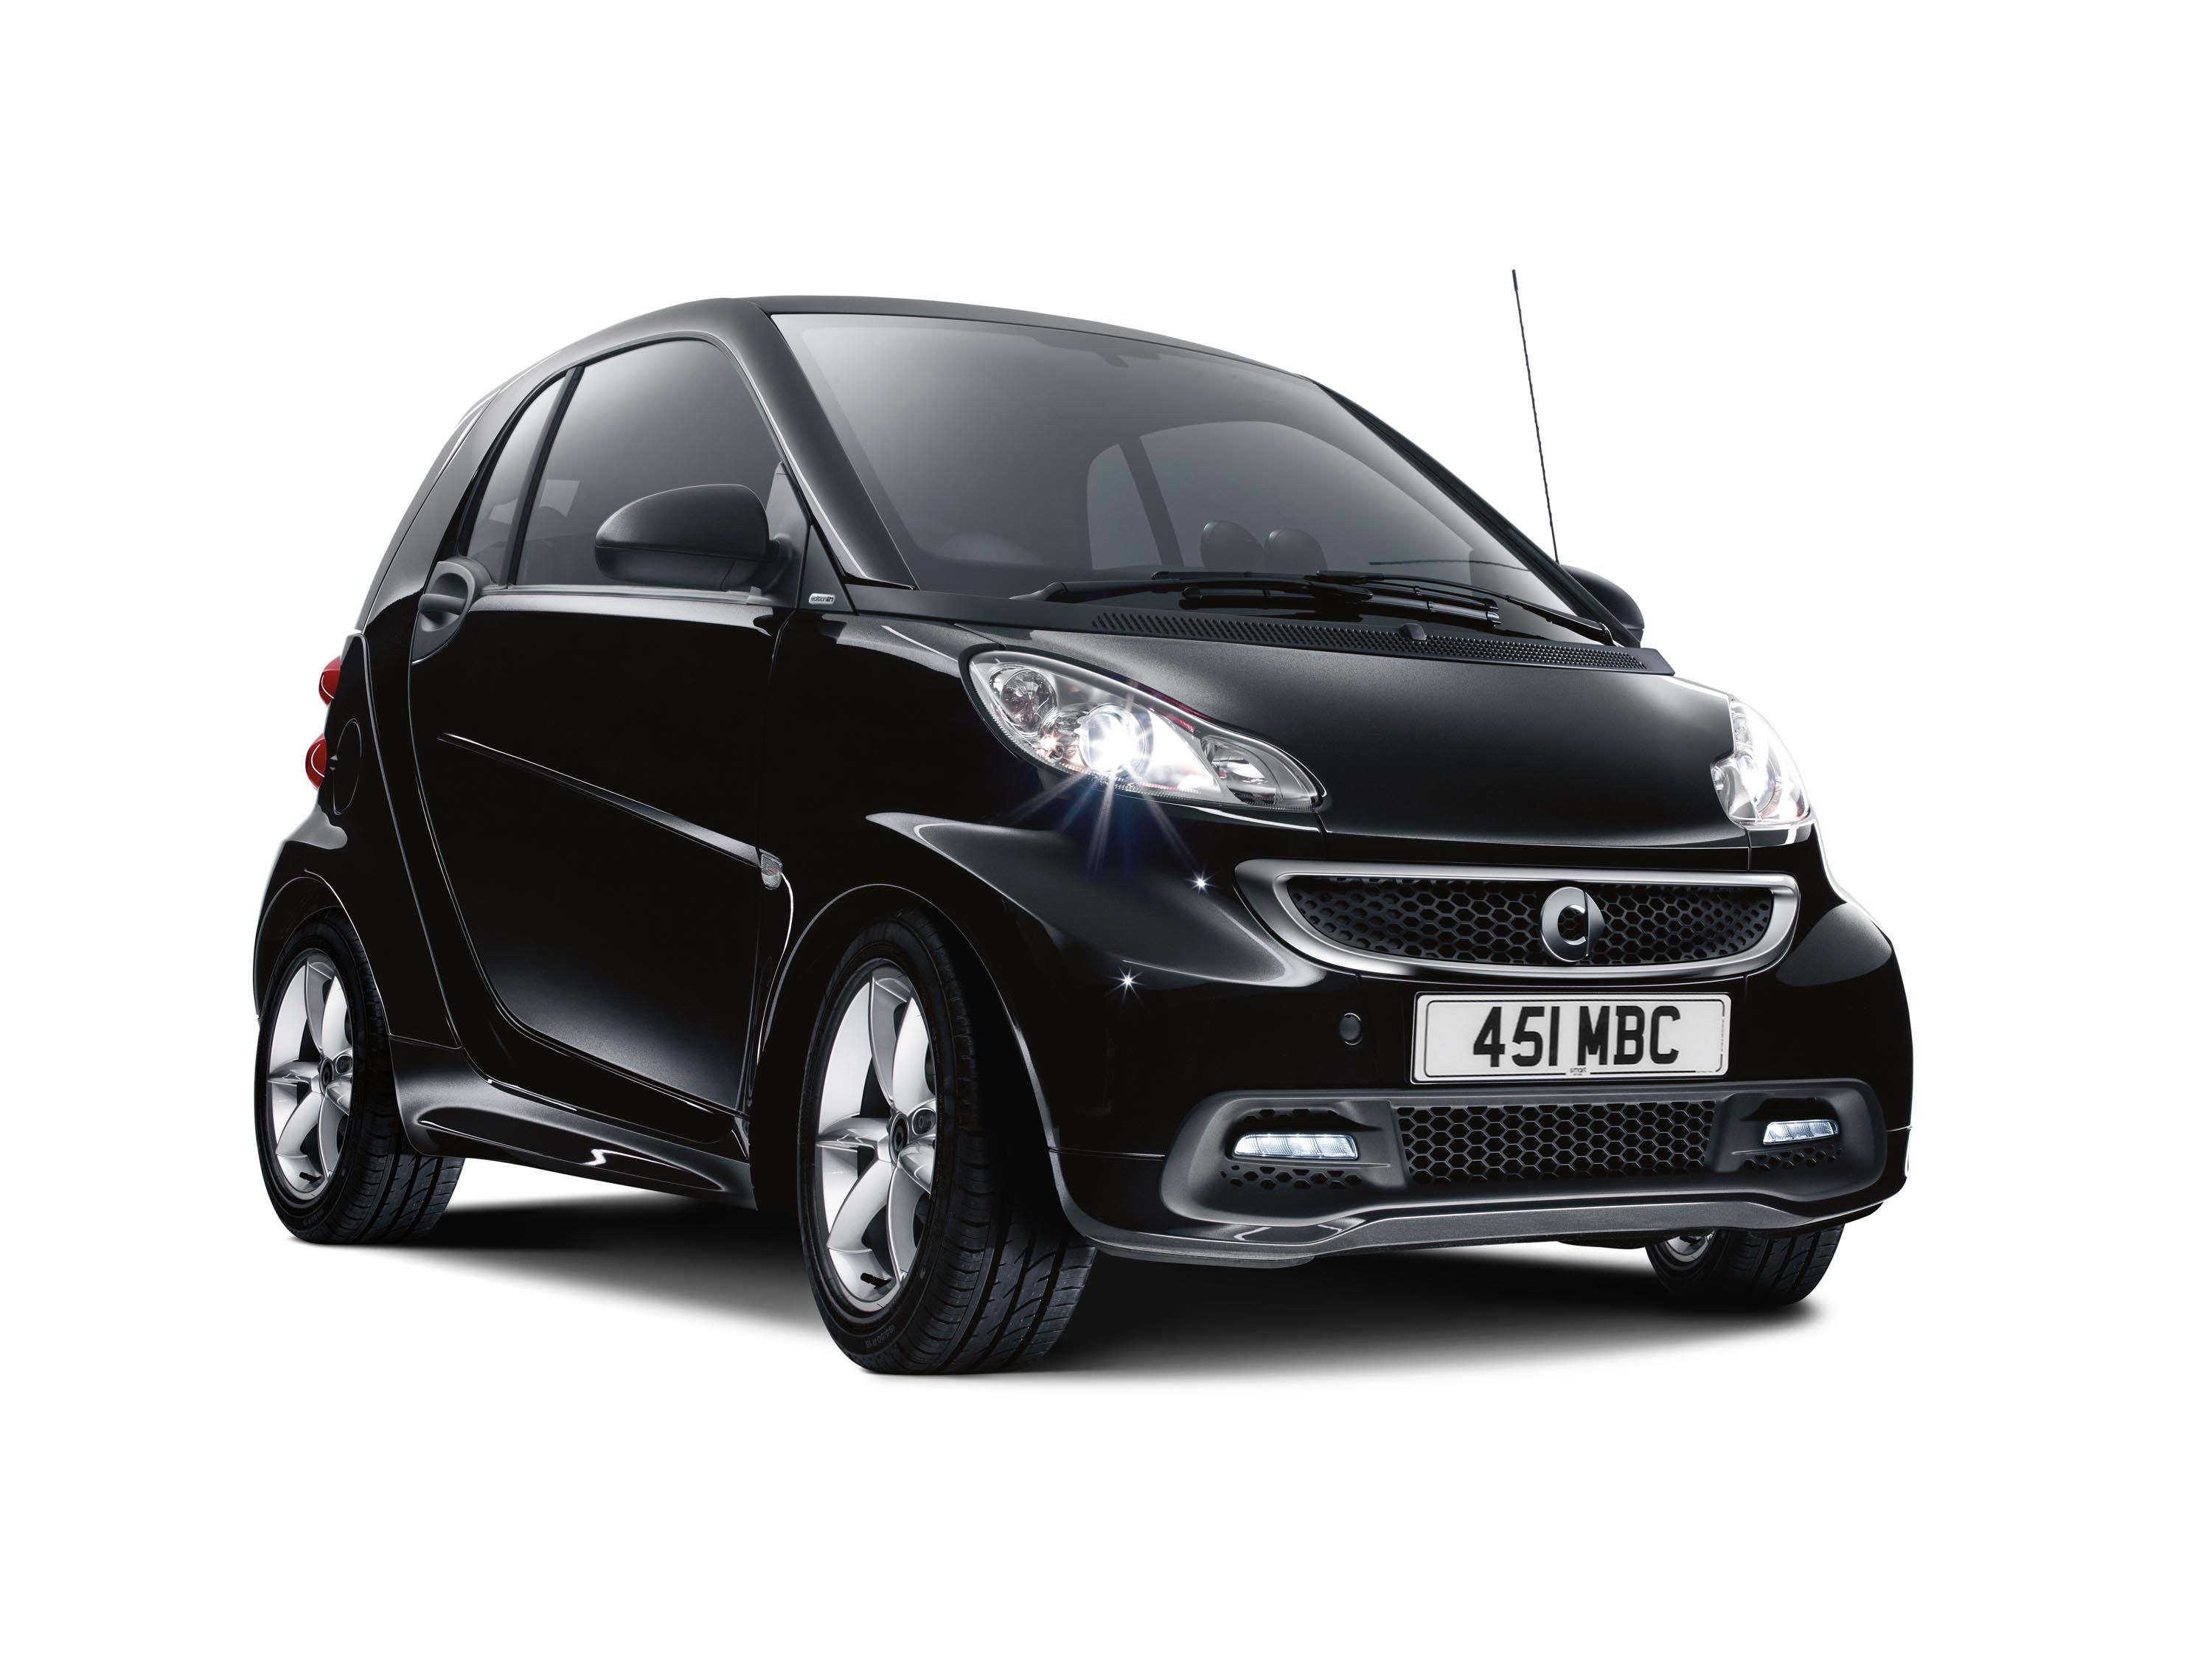 2013 Smart ForTwo Edition21